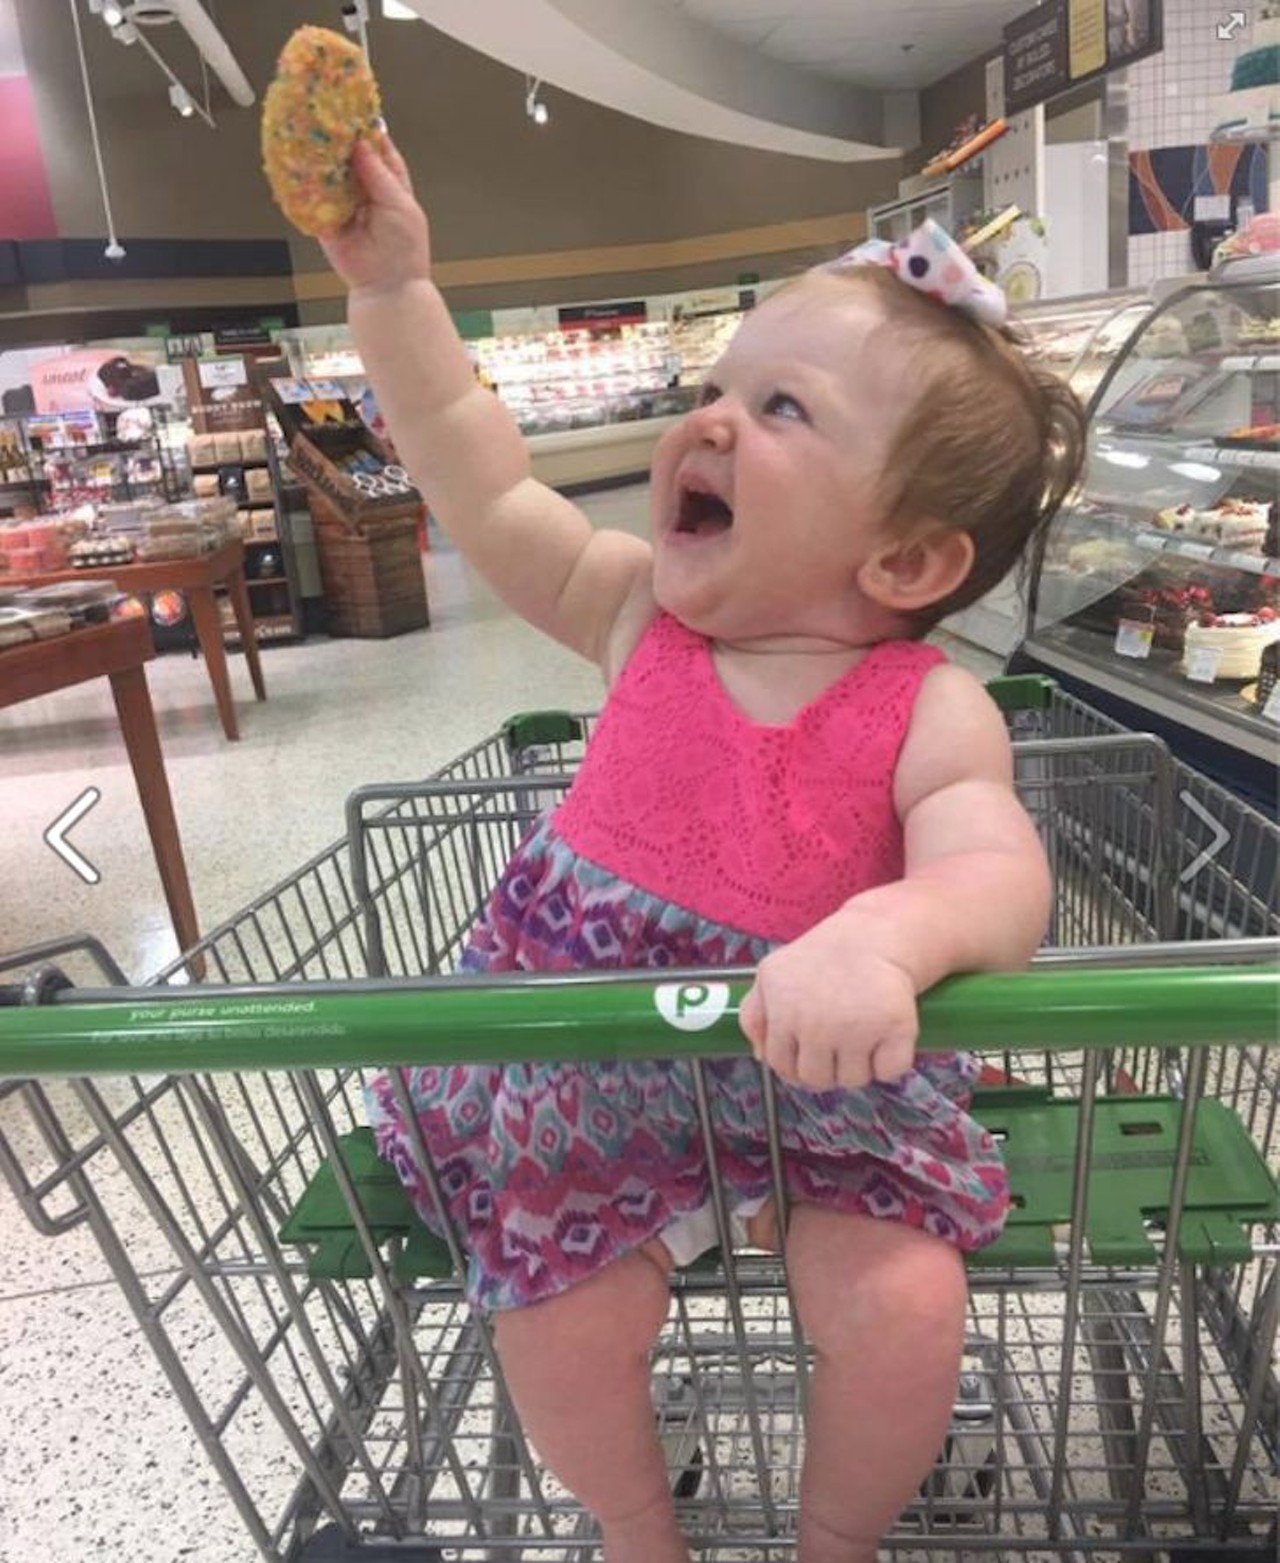 Kids get free cookies, and so do the adults who confiscate them
The best way to get your child to behave in a store is to bribe them with some type of junk food. Publix will provide that treat for you: Stop by the bakery and get a free cookie for the little one, or keep it for yourself. 
Photo via Publix Facebook